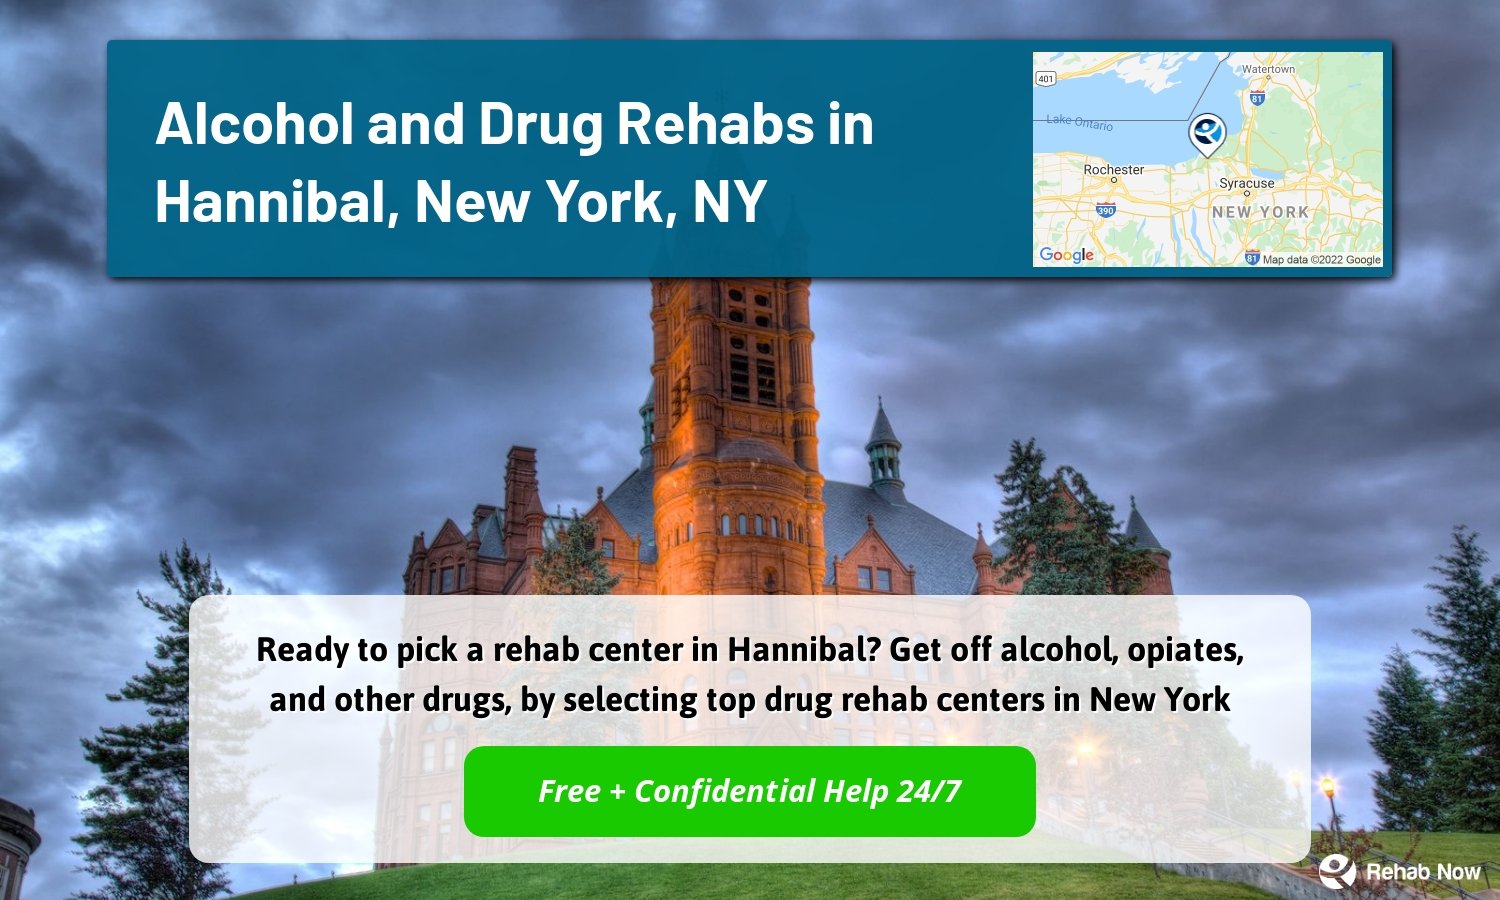 Ready to pick a rehab center in Hannibal? Get off alcohol, opiates, and other drugs, by selecting top drug rehab centers in New York